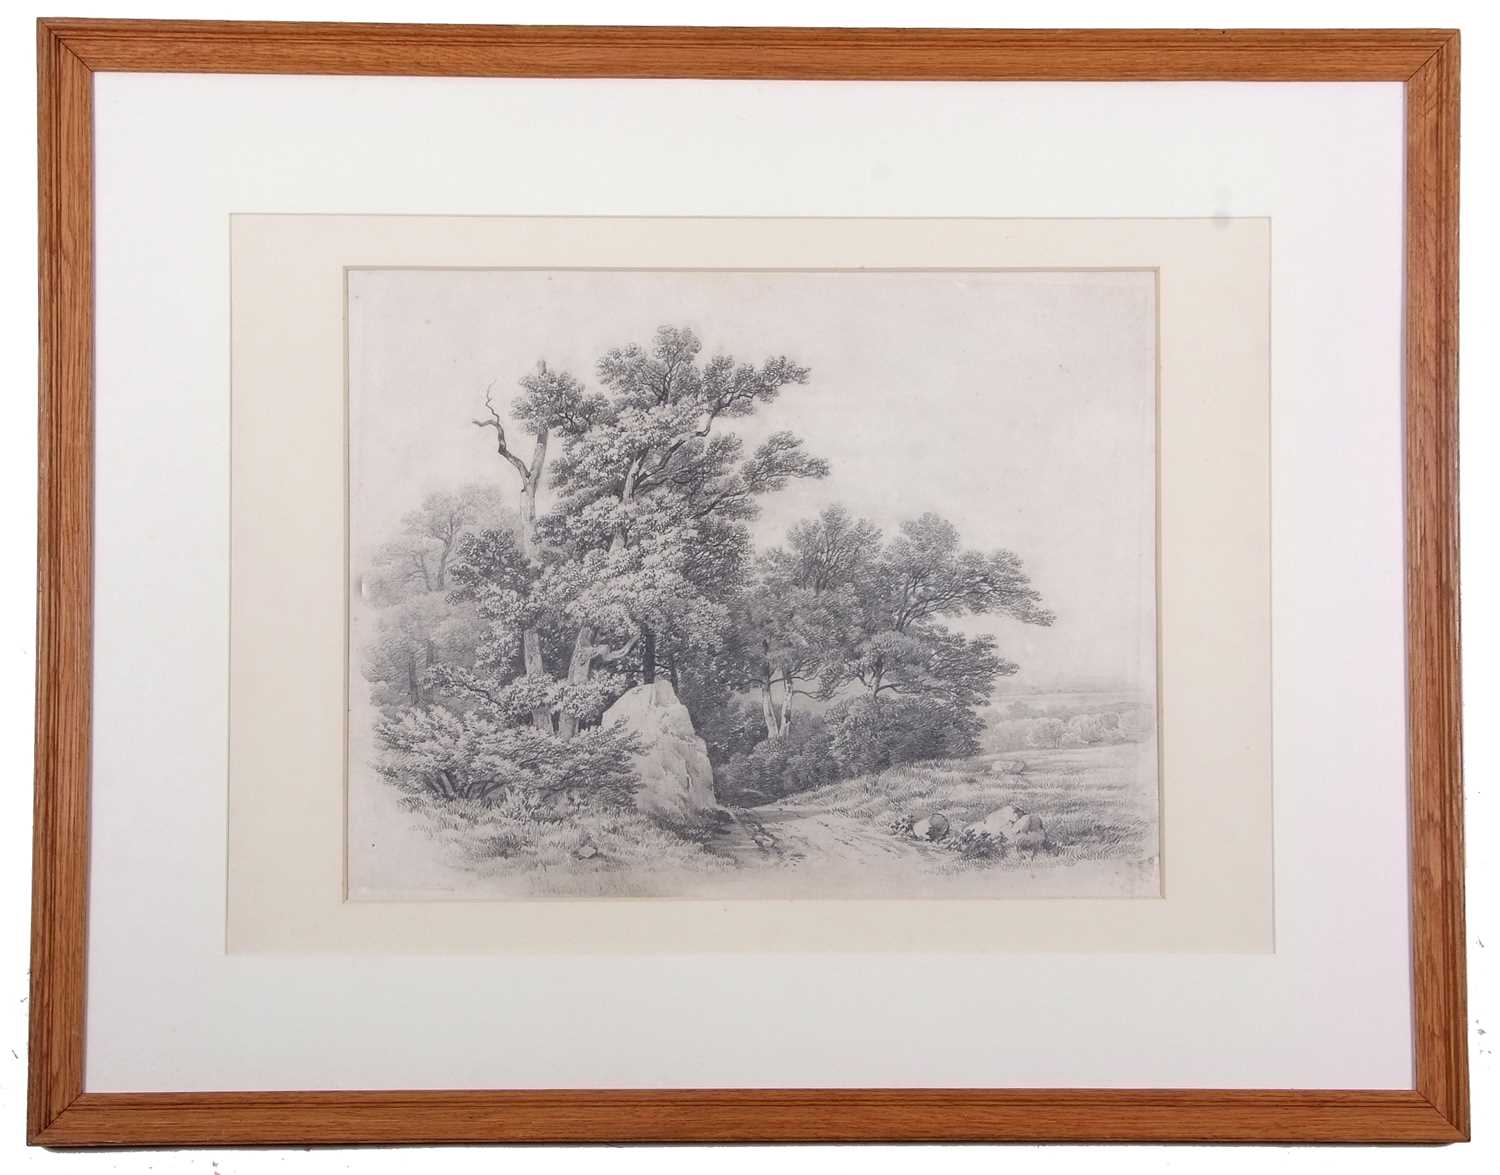 John Berney Ladbrooke (1803-1879), Wooded Landscape, pencil on paper, signed and dated 1855, - Image 2 of 3